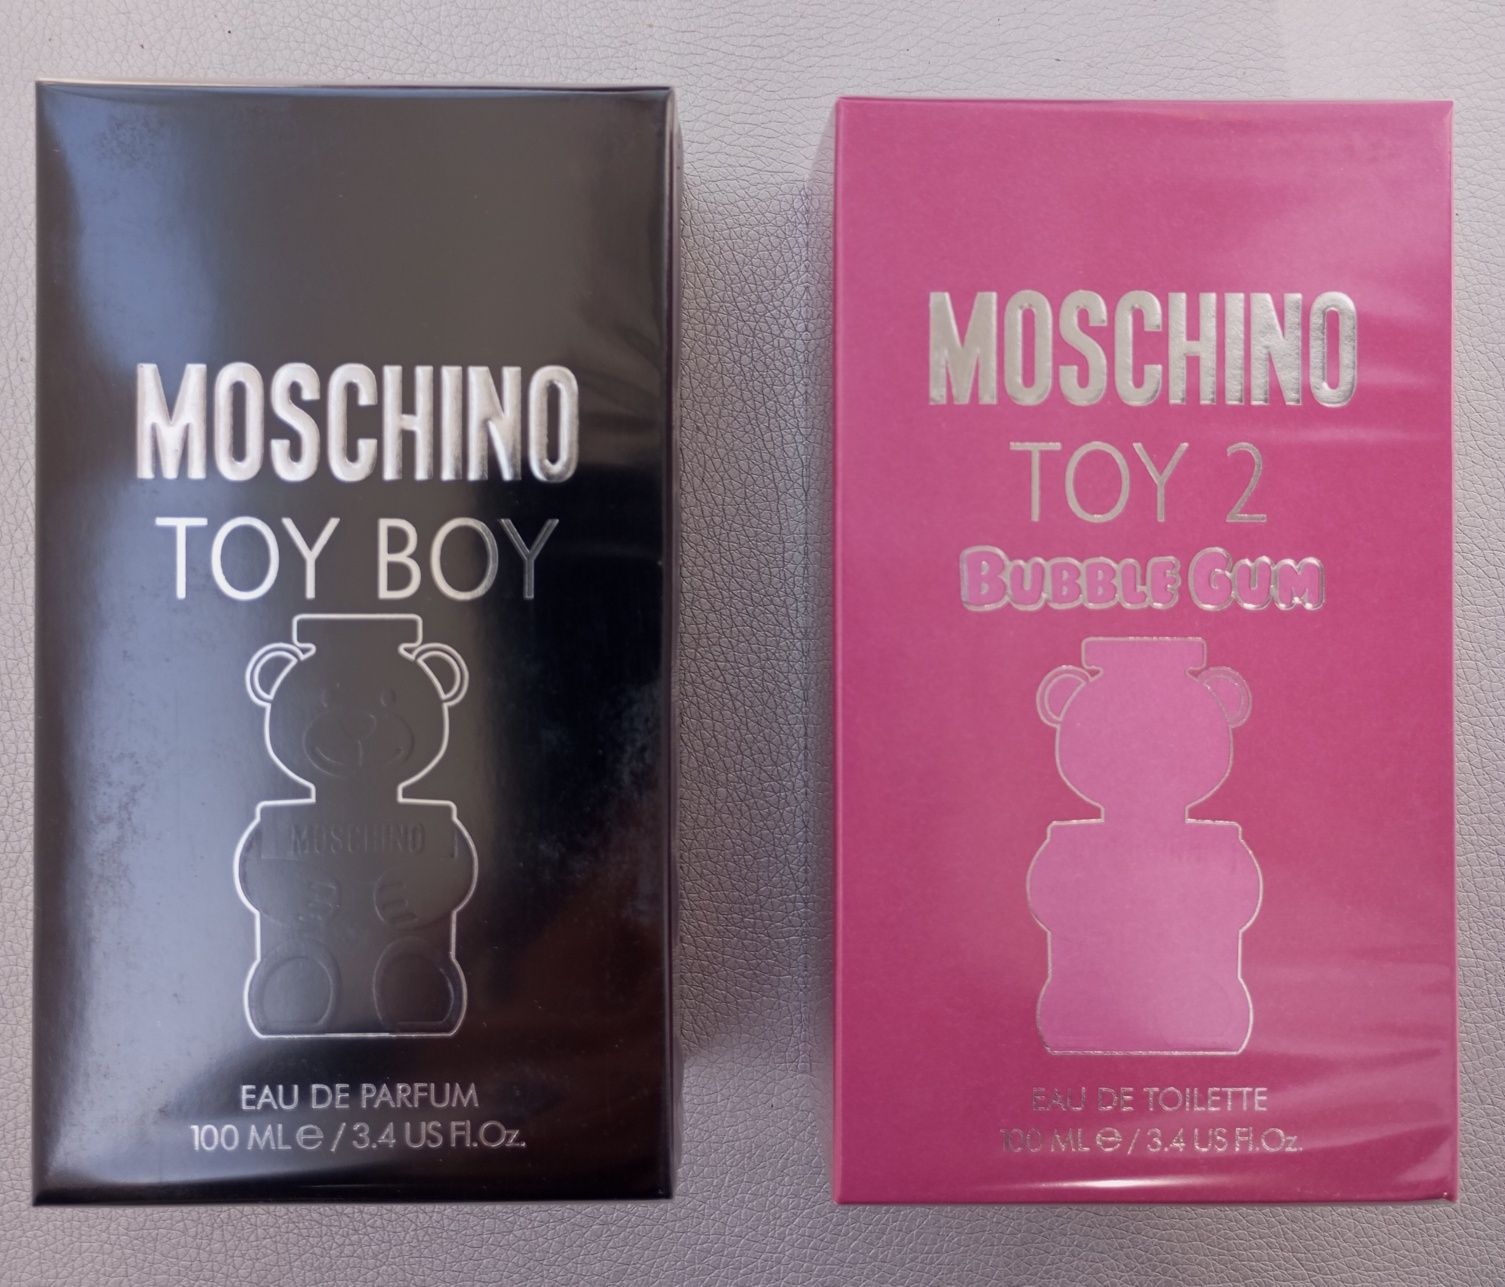 Парфуми Moschino Toy boy, Toy 2 bubble gum